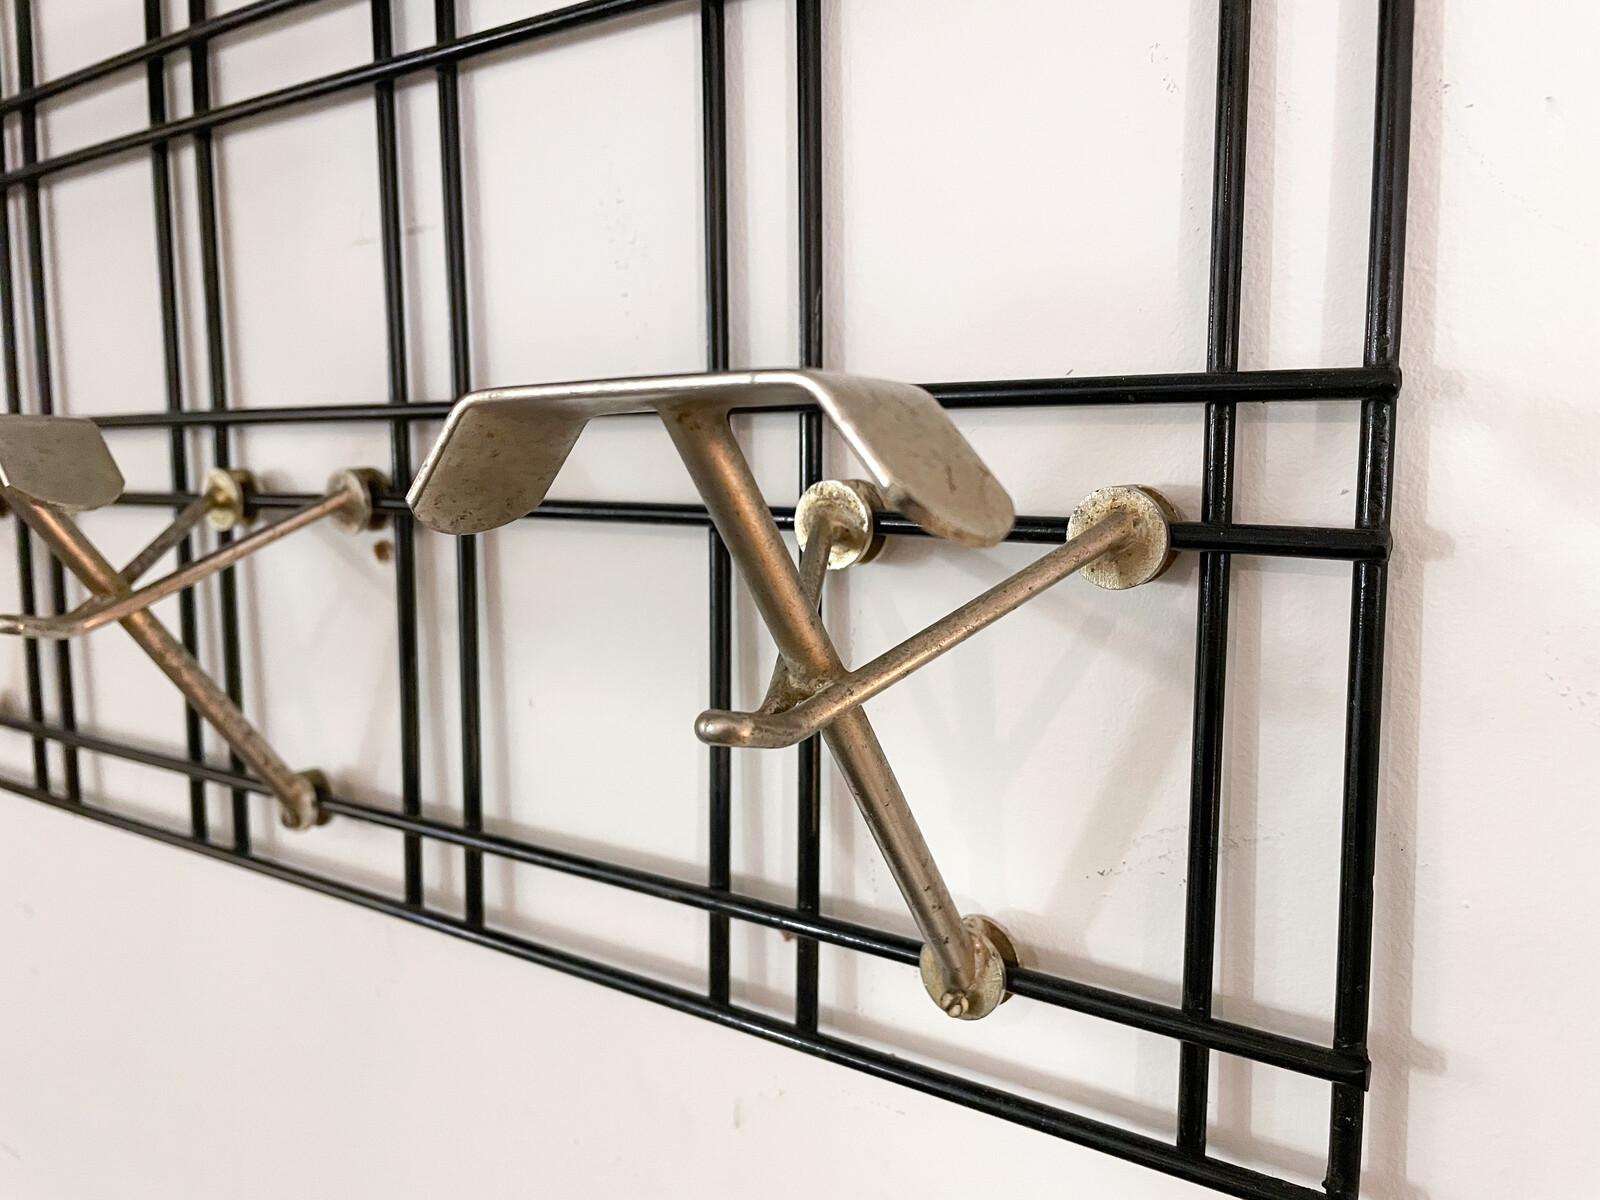 Mid-20th Century Mid-Century Modern Coat Rack by Studio BBPR for Olivetti - Italy 1960s For Sale